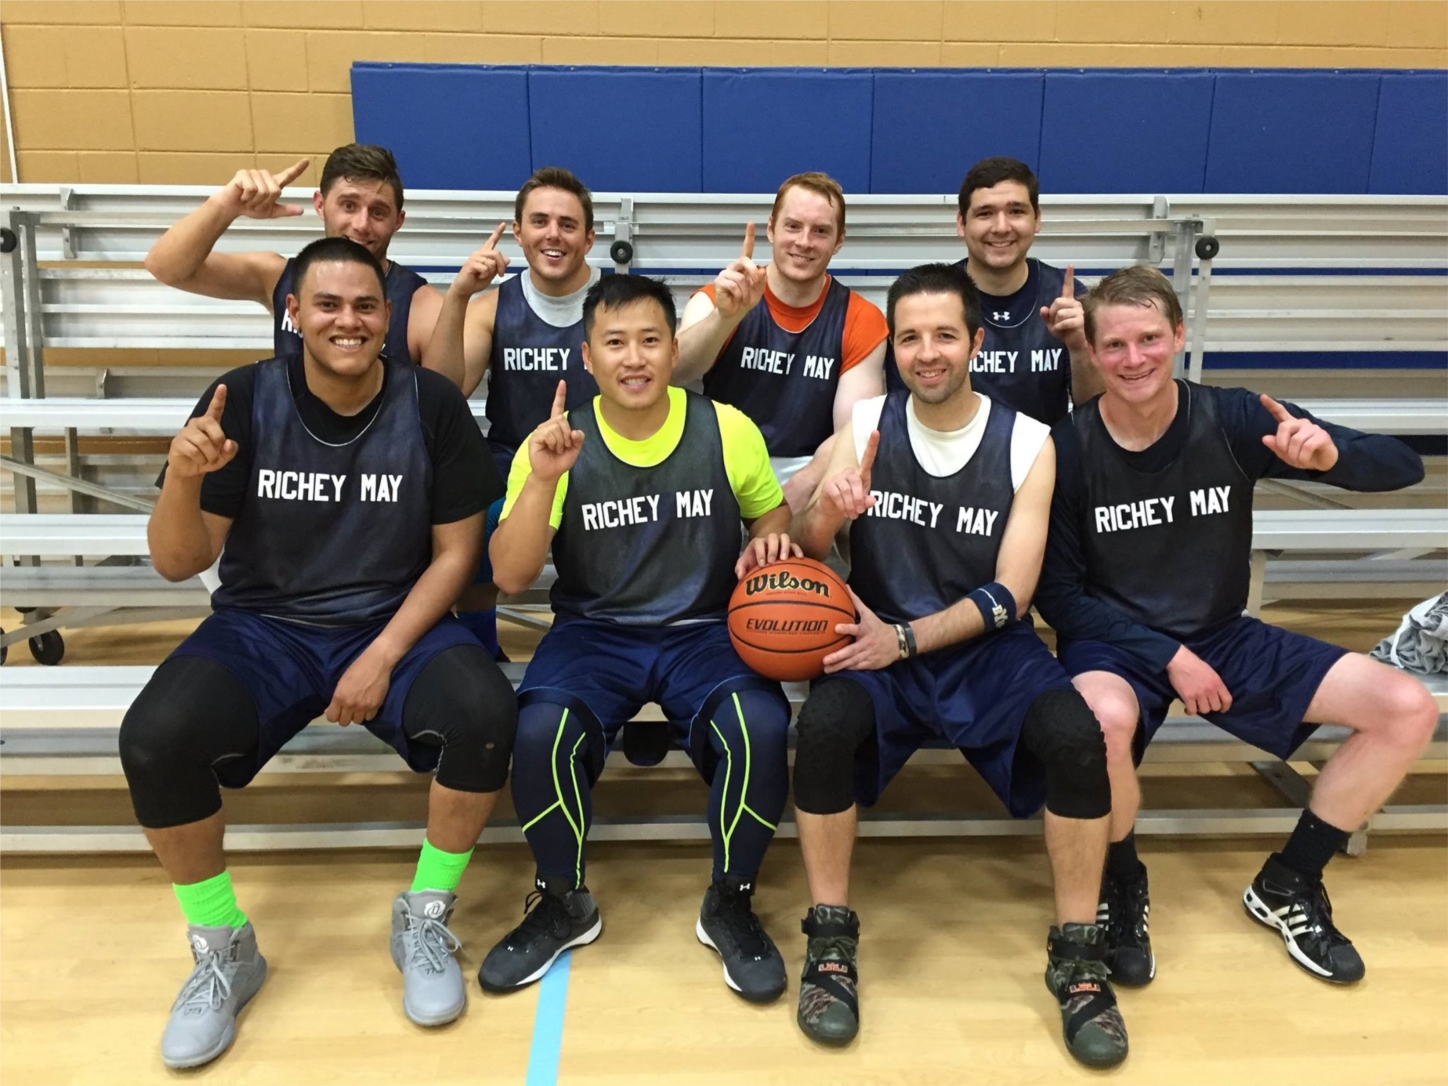 Champions of the South Suburban Parks and Rec Basketball League!